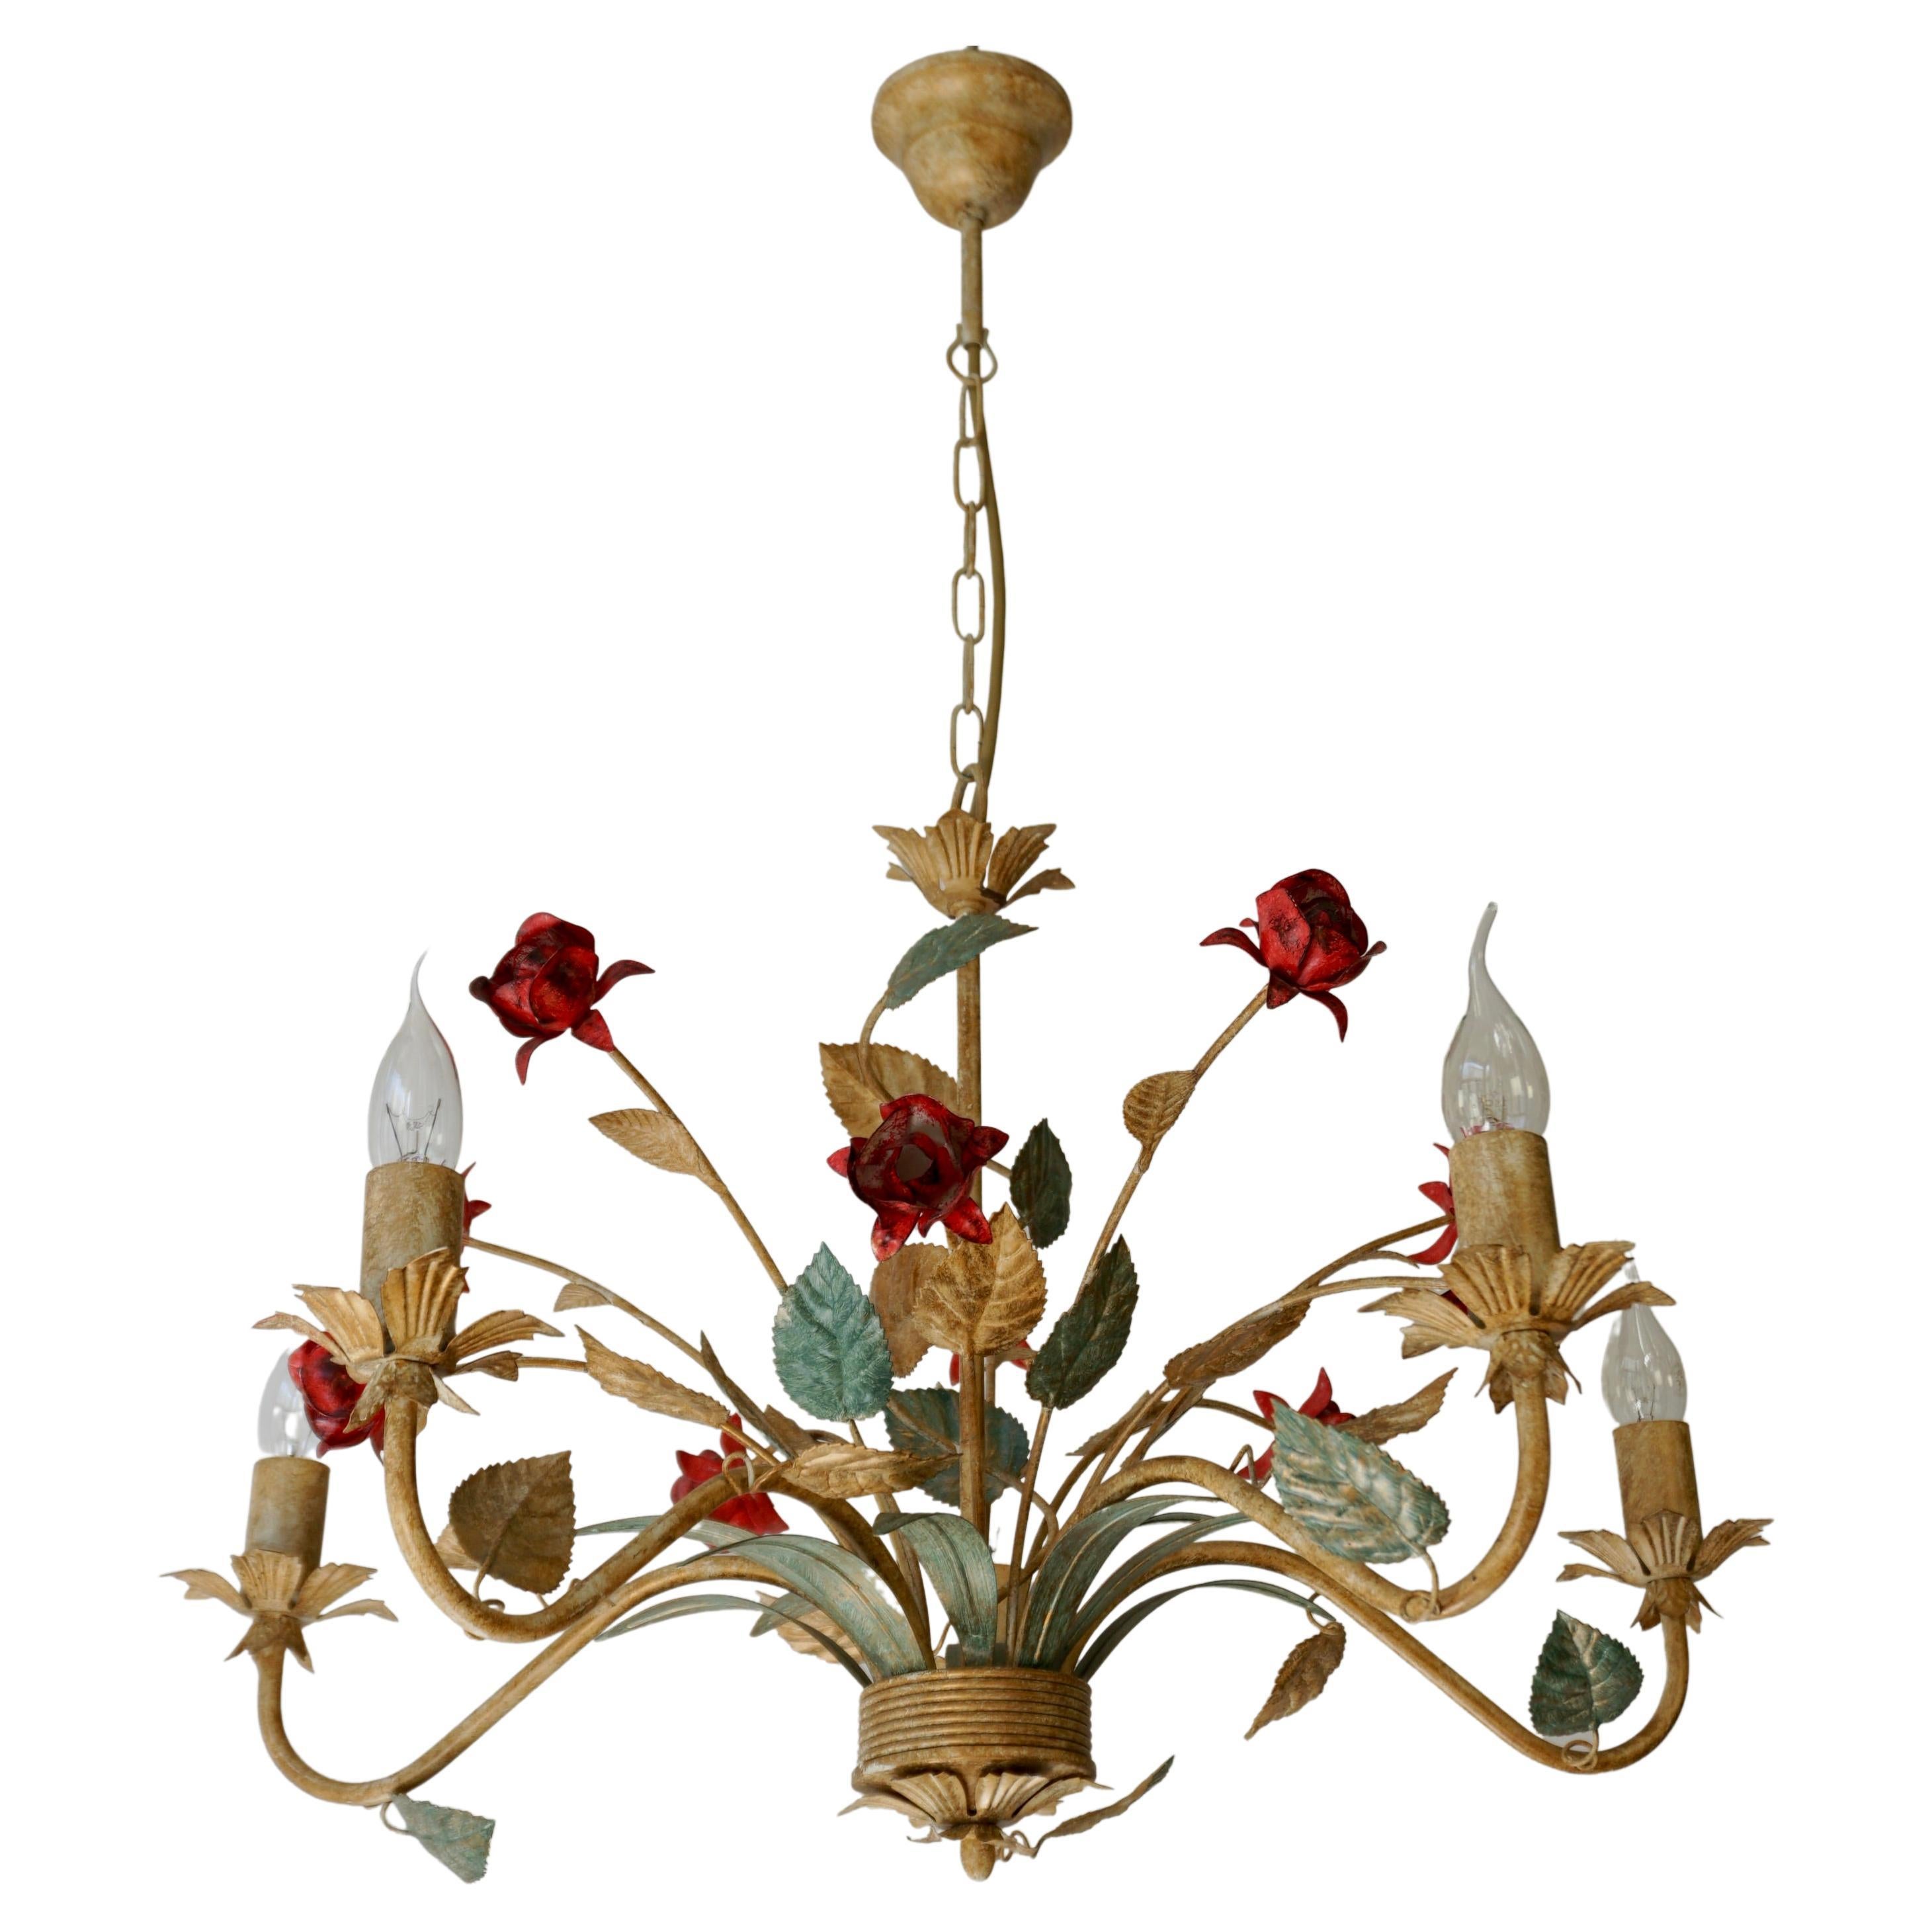 Italian Tole Ware Painted Chandelier with Red Roses 5 Light For Sale